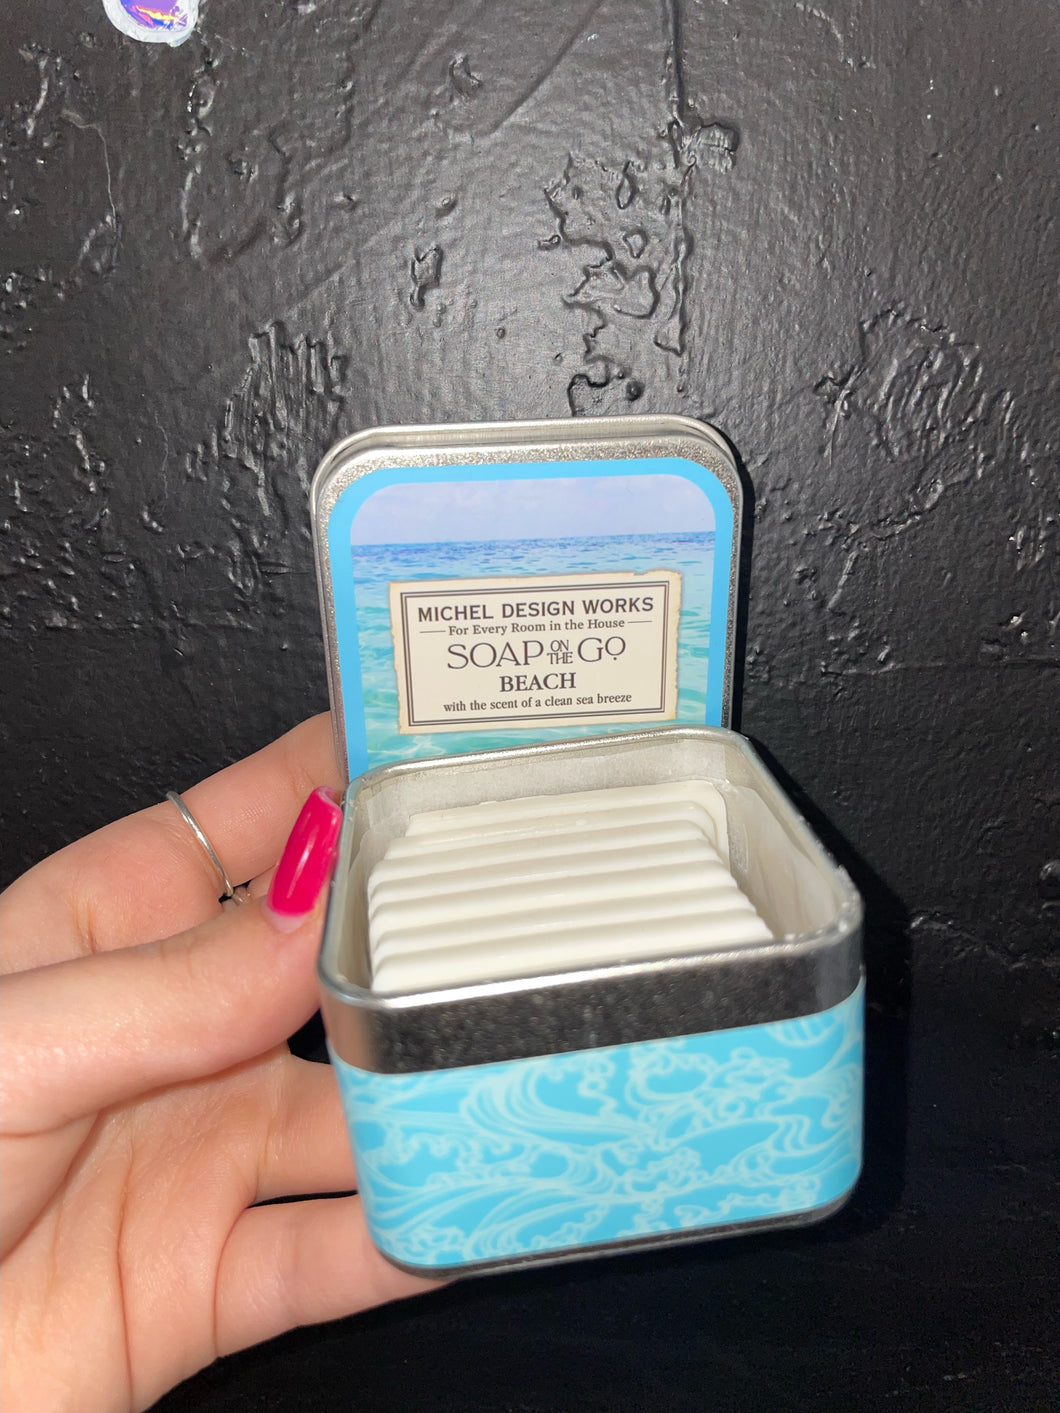 Michel Design Works travel soap on the go tin